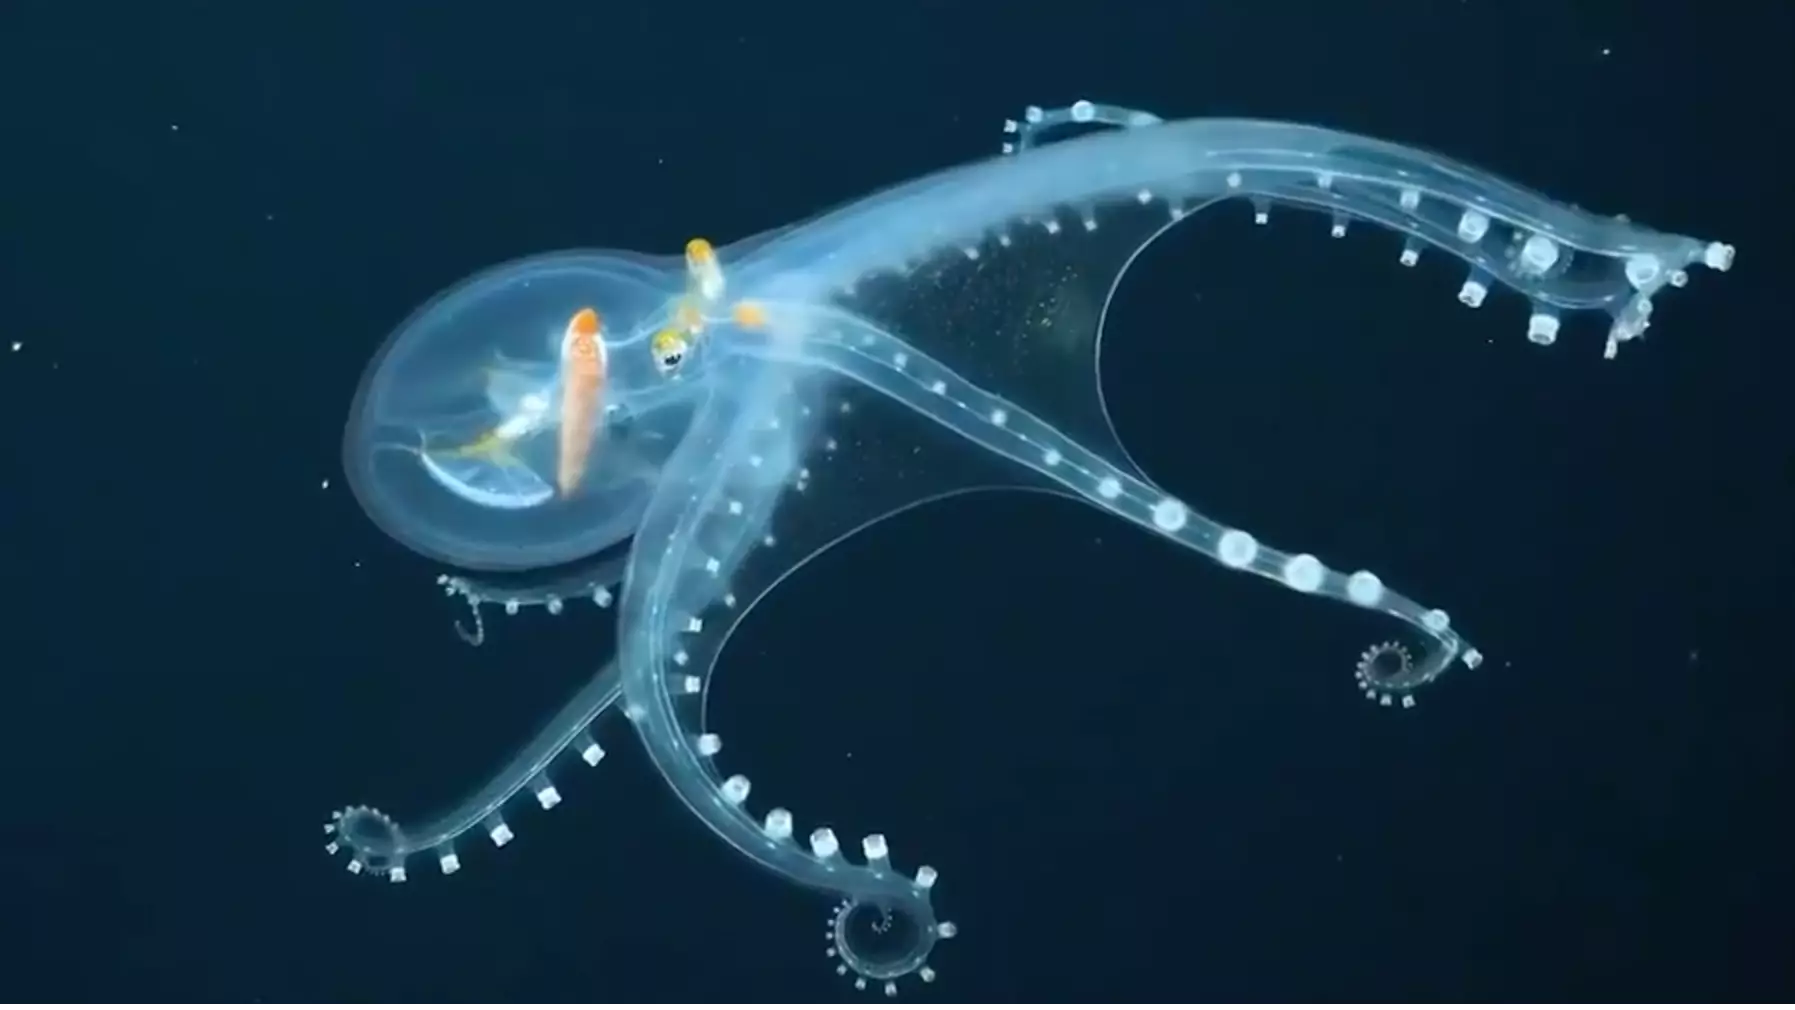  Scientists Capture Extremely Rare Footage Of Glass Octopus In Remote Pacific Ocean